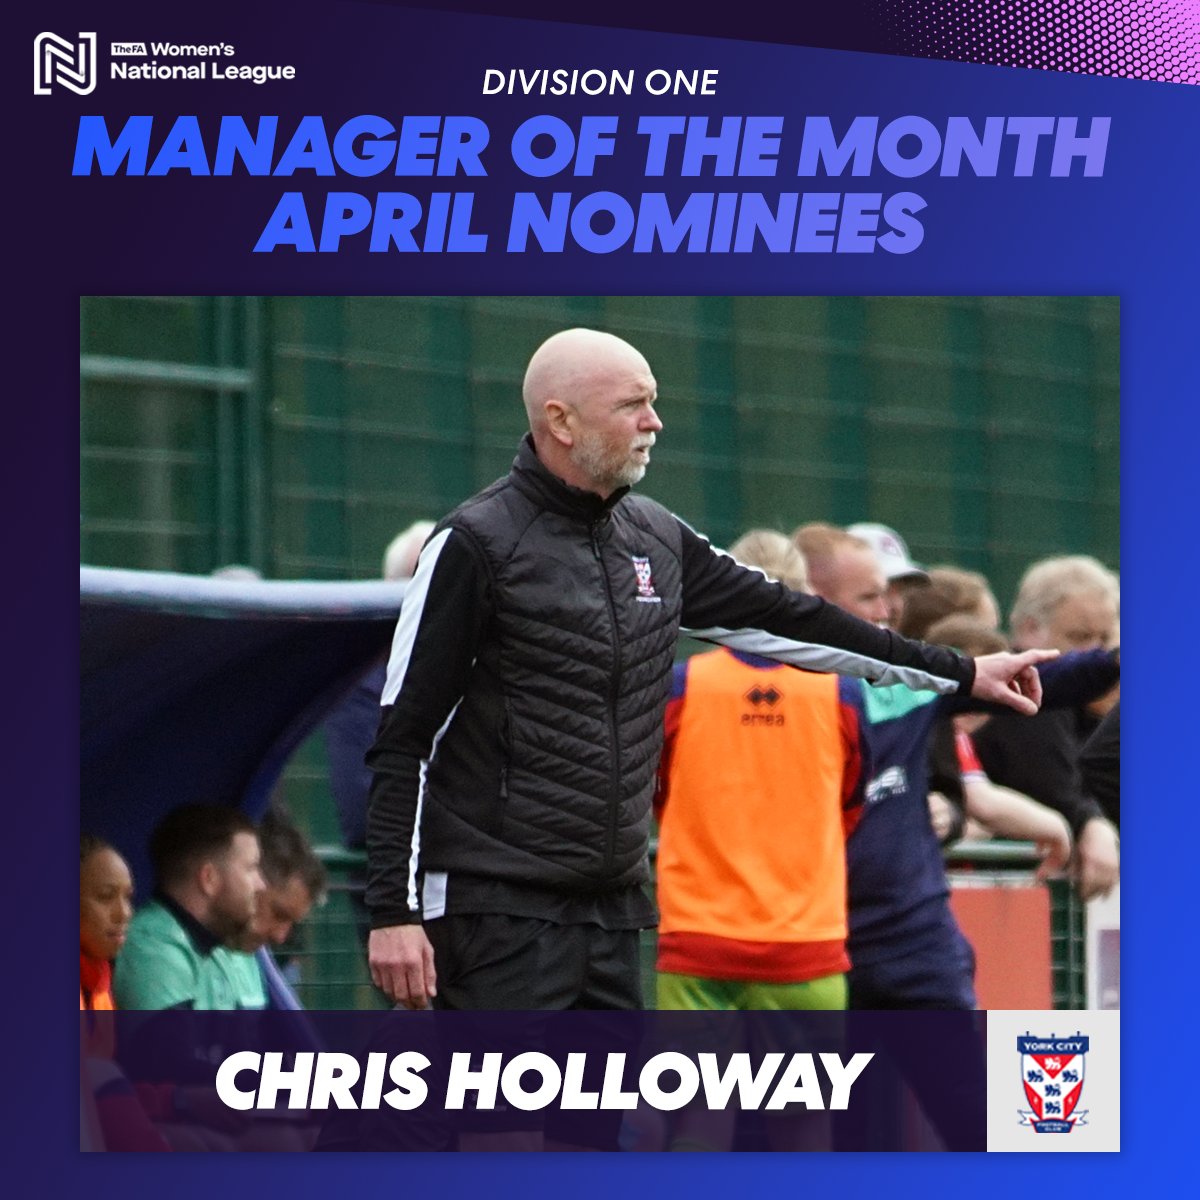 @Mattchat11 @SFCWomen @AFCBournemouthW @Hollo1975 @YorkCityLFC @SJJ_16 @LeafieldAthLFC Chris Holloway - York City One win and a draw in April went a long way to confirming York City’s safety. York held eventual champions Hull to a 1-1 draw, repeating the scoreline against Stockport after beating Chester le Street Town 3-0. #MOTM | @Hollo1975 | @YorkCityLFC